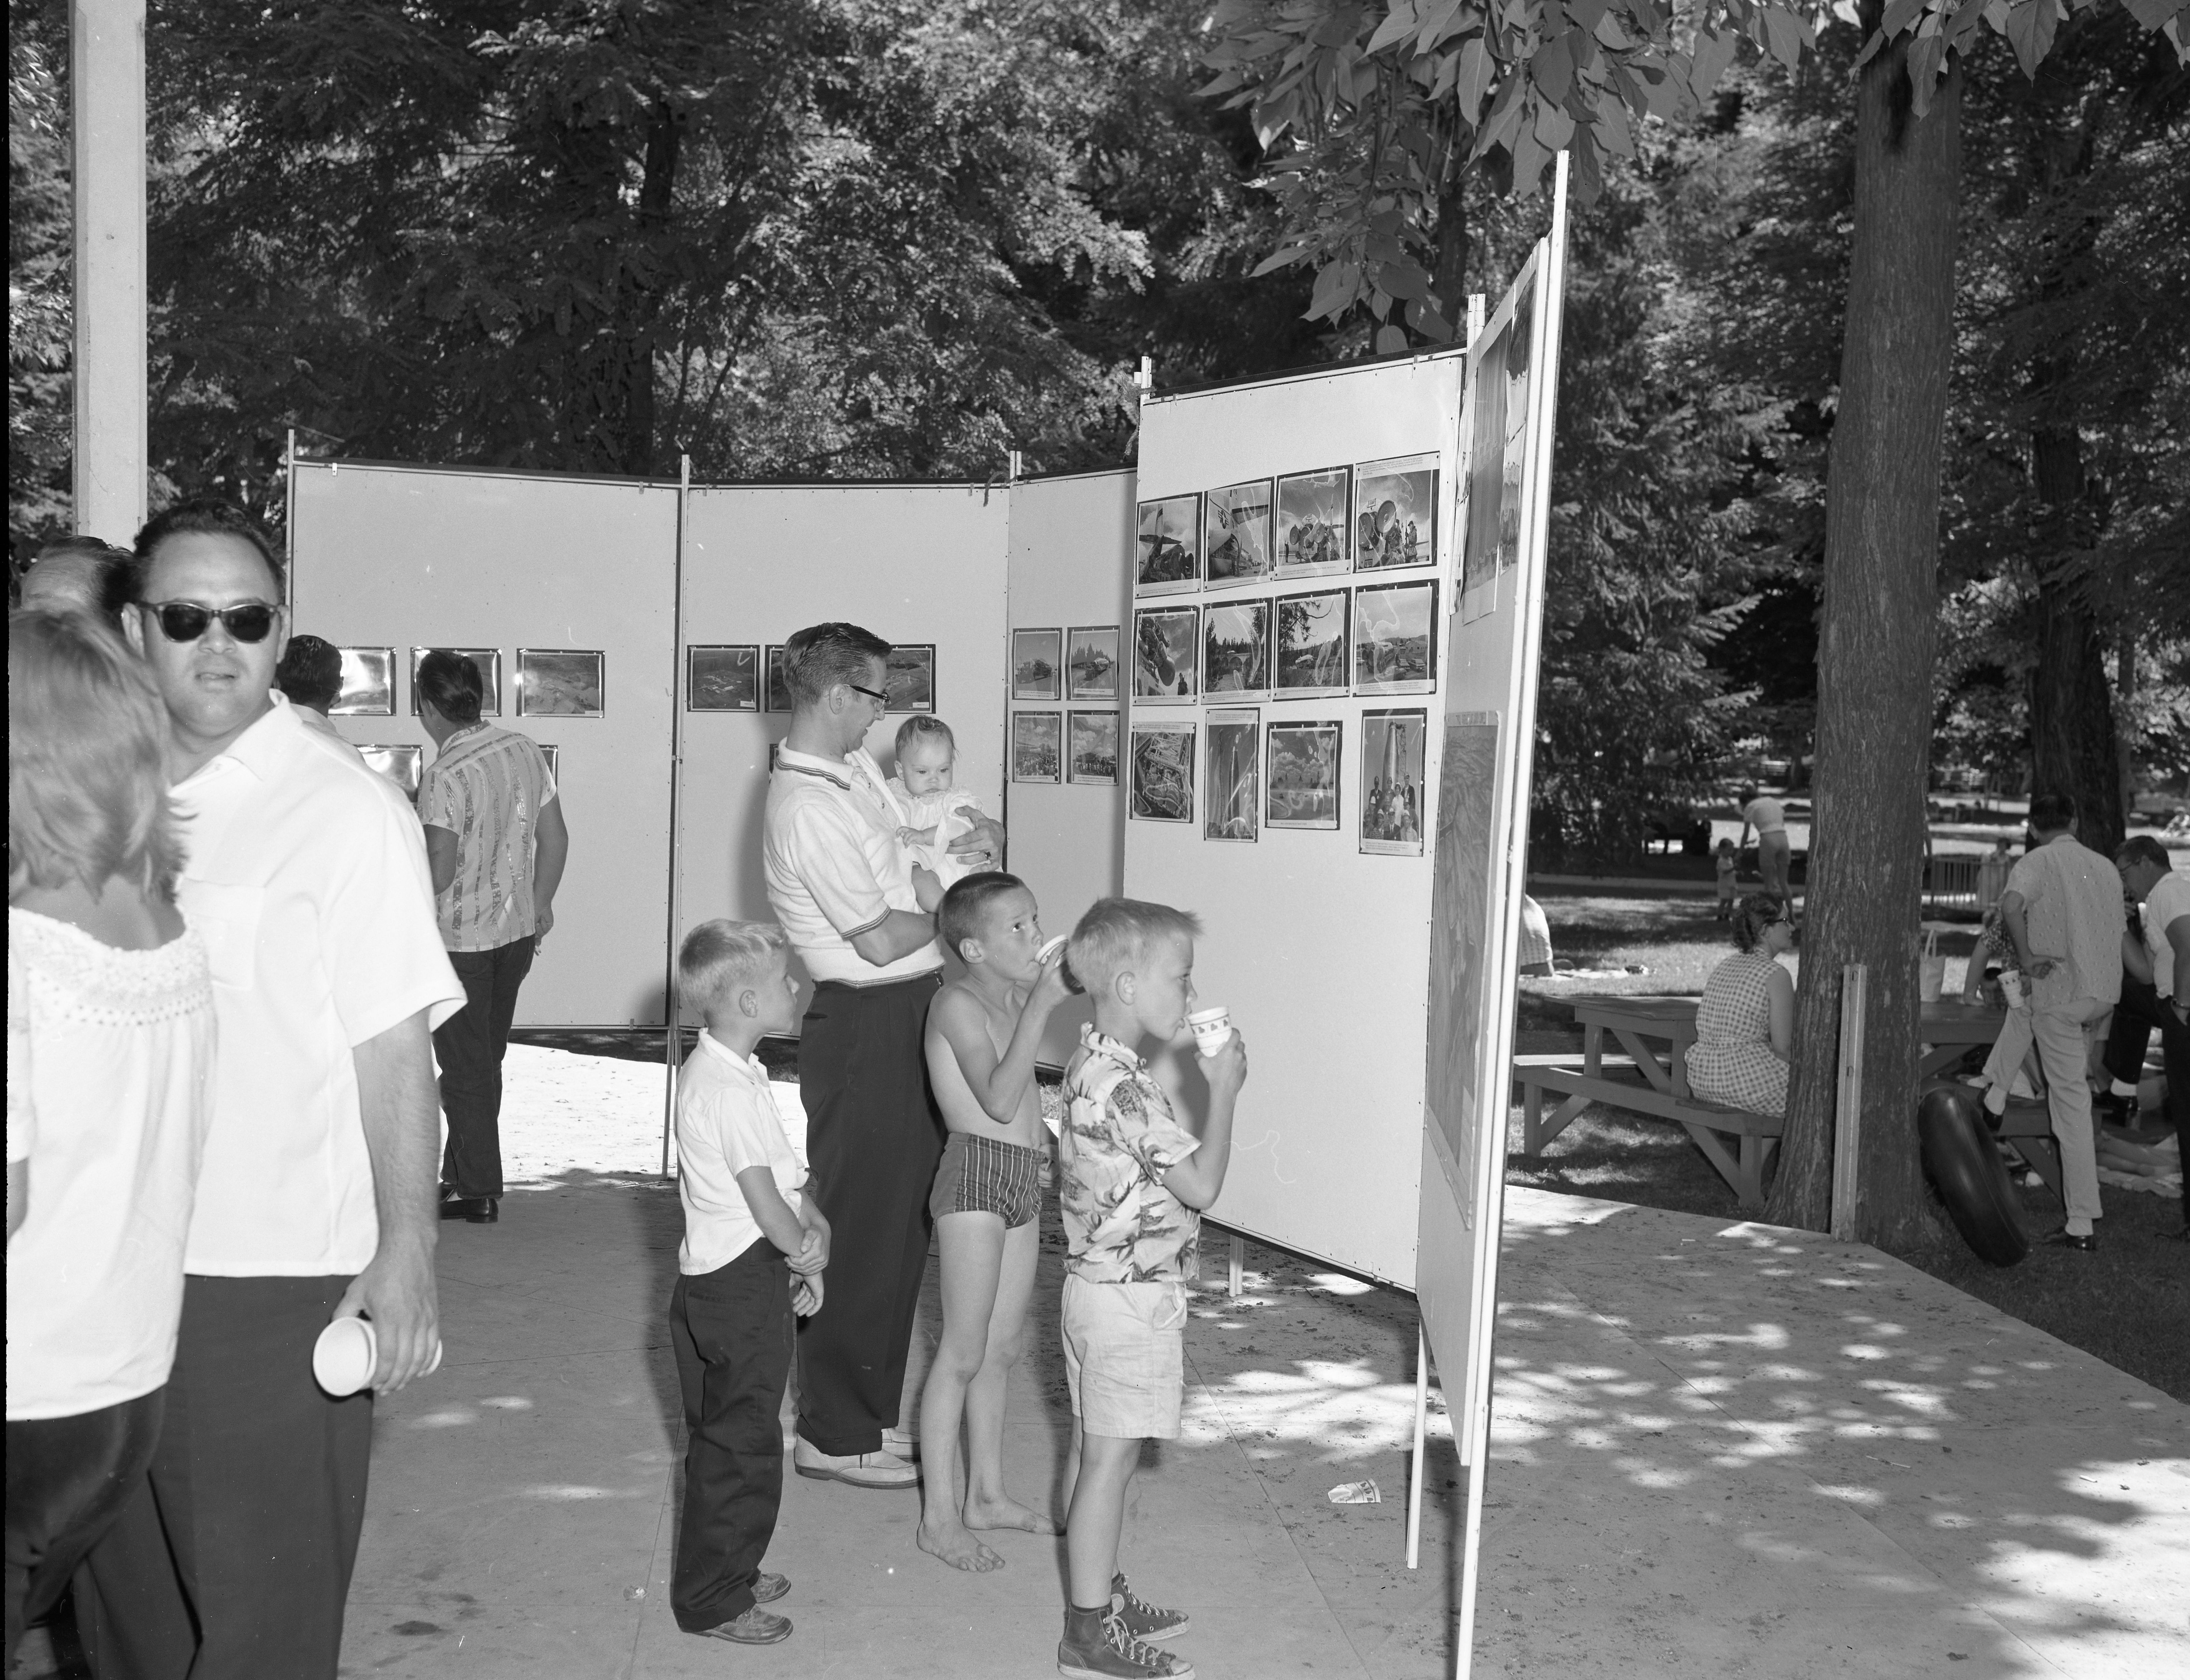 Convair employee showing his family examples of the work completed by Convair Astronautics employees at Fairchild U.S. Air Force Base. 